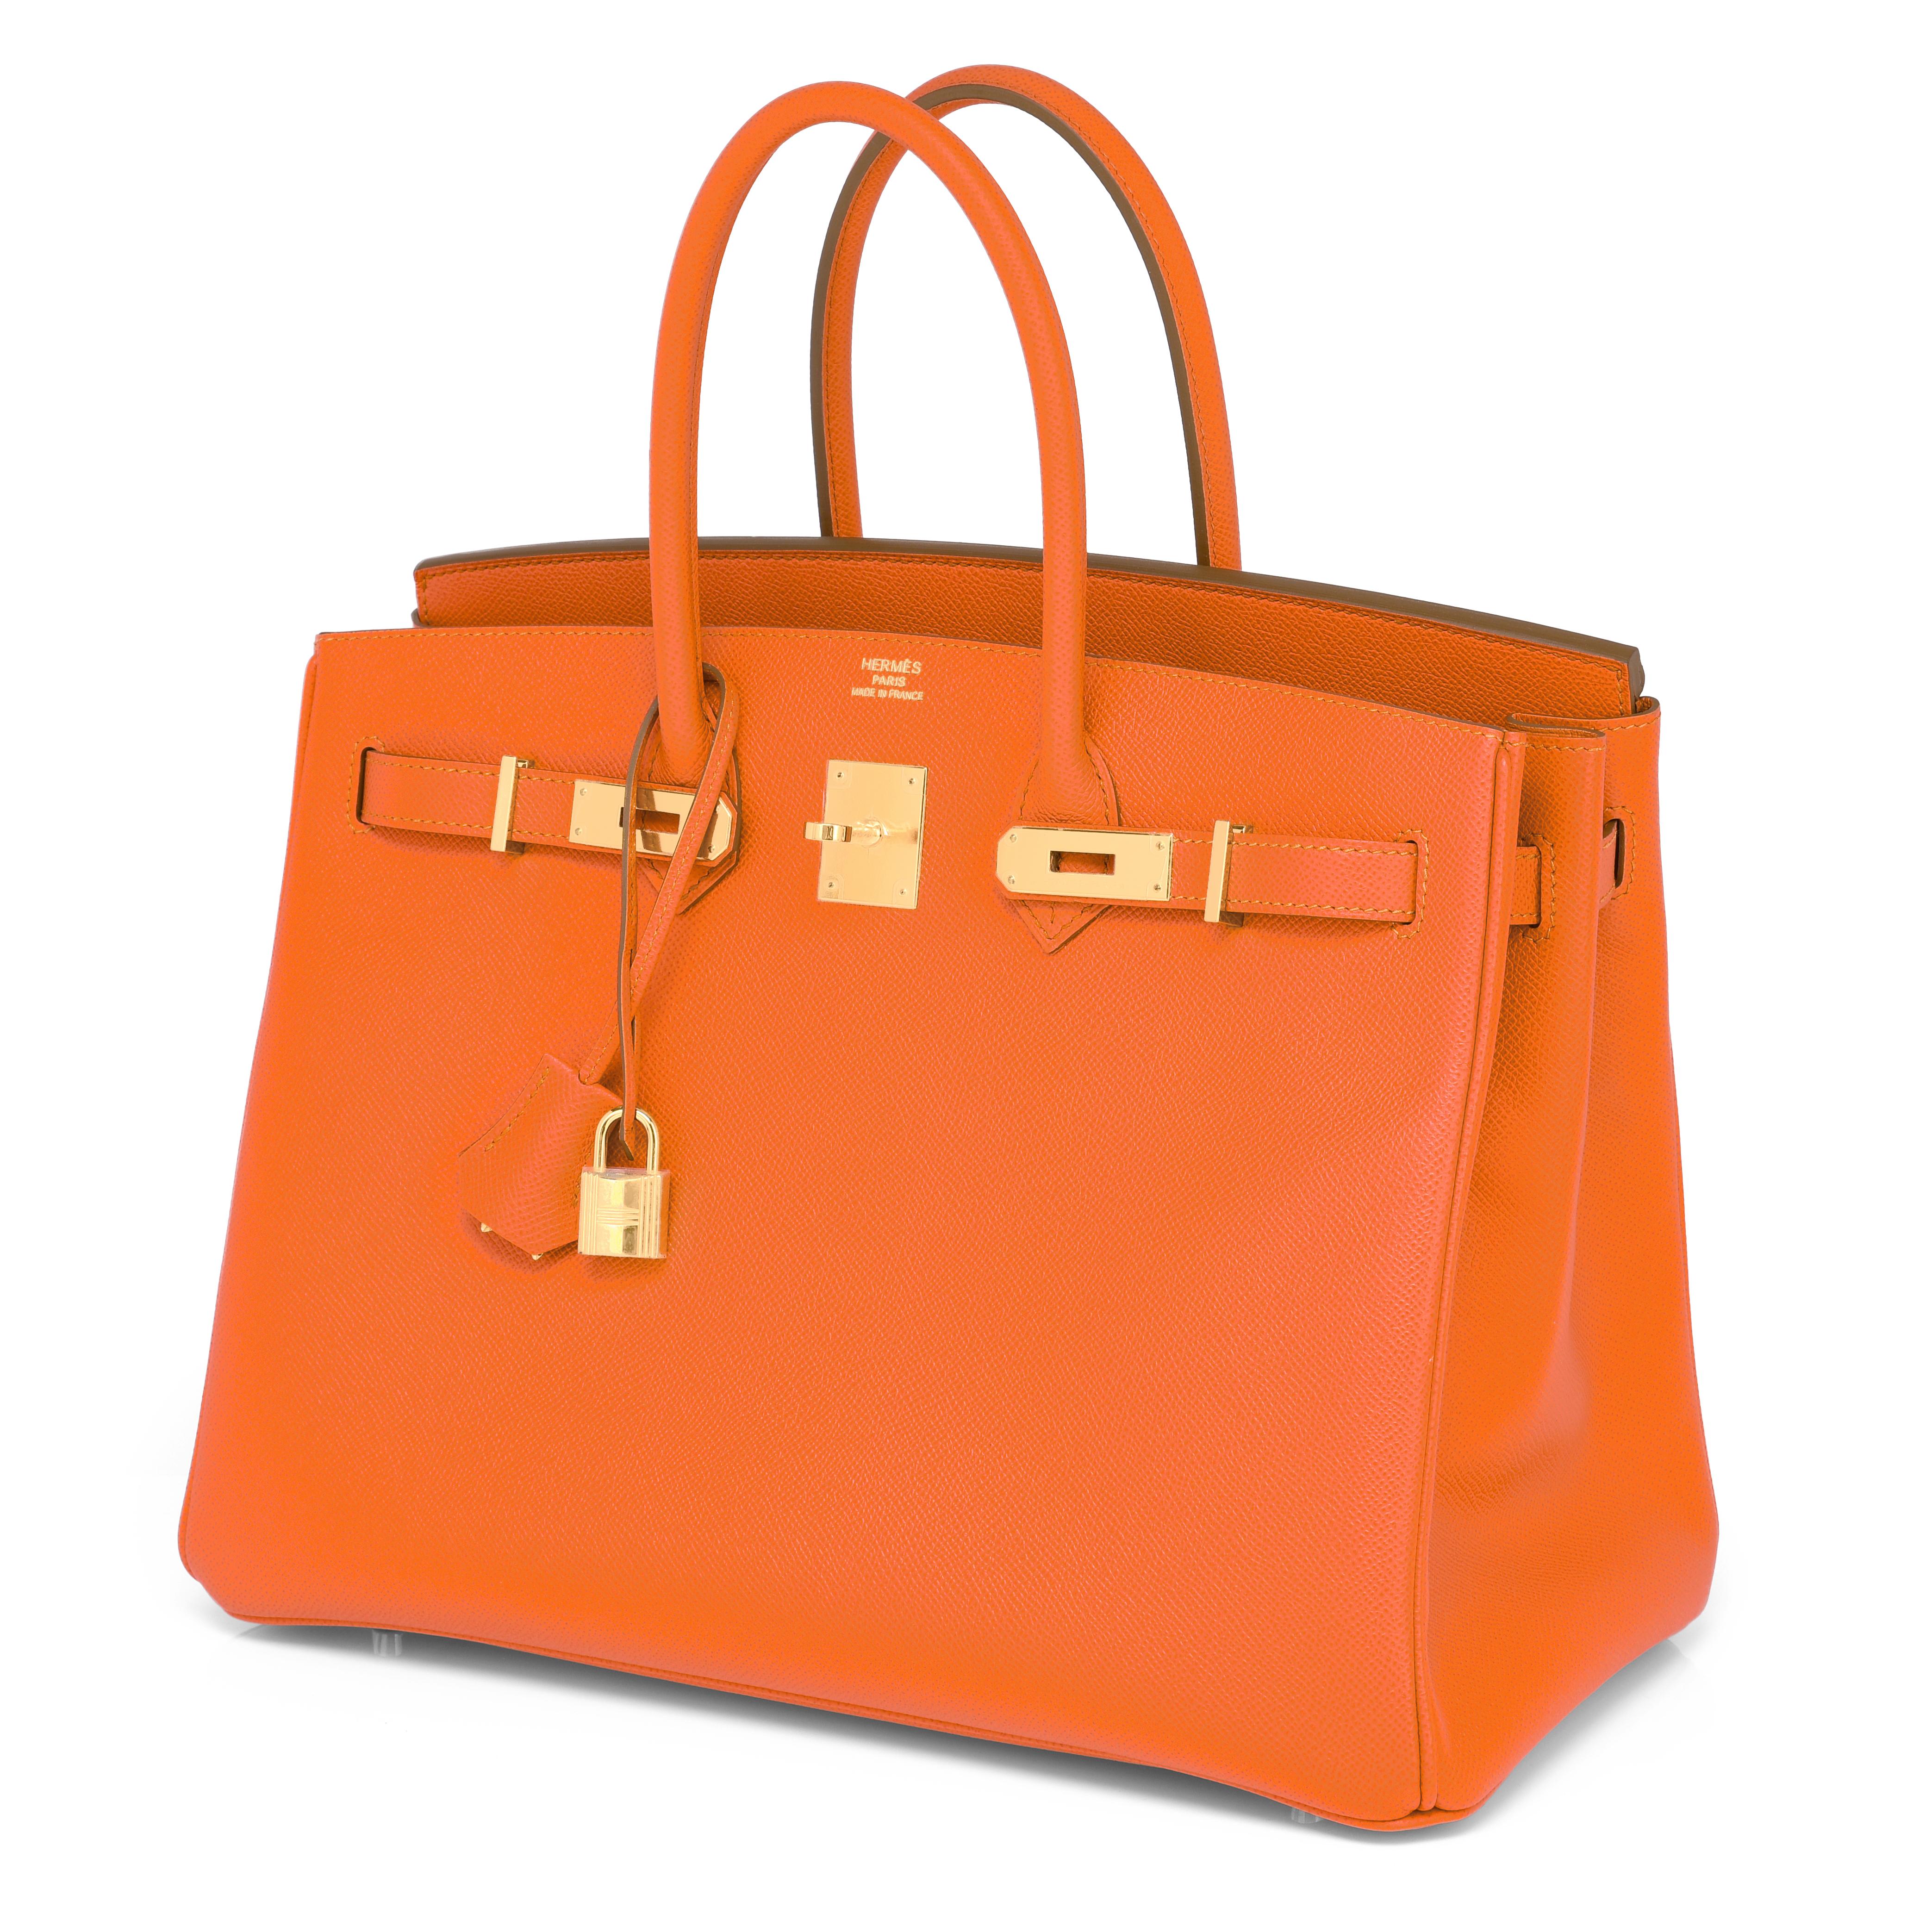 Guranteed Authentic Hermes Classic Orange Epsom Gold Hardware Birkin 35cm Bag
Extremely rare find in New or Never Worn condition (with plastic on hardware). 
Perfect gift!  Comes in full set with lock, keys, clochette, sleeper, raincoat, and Hermes